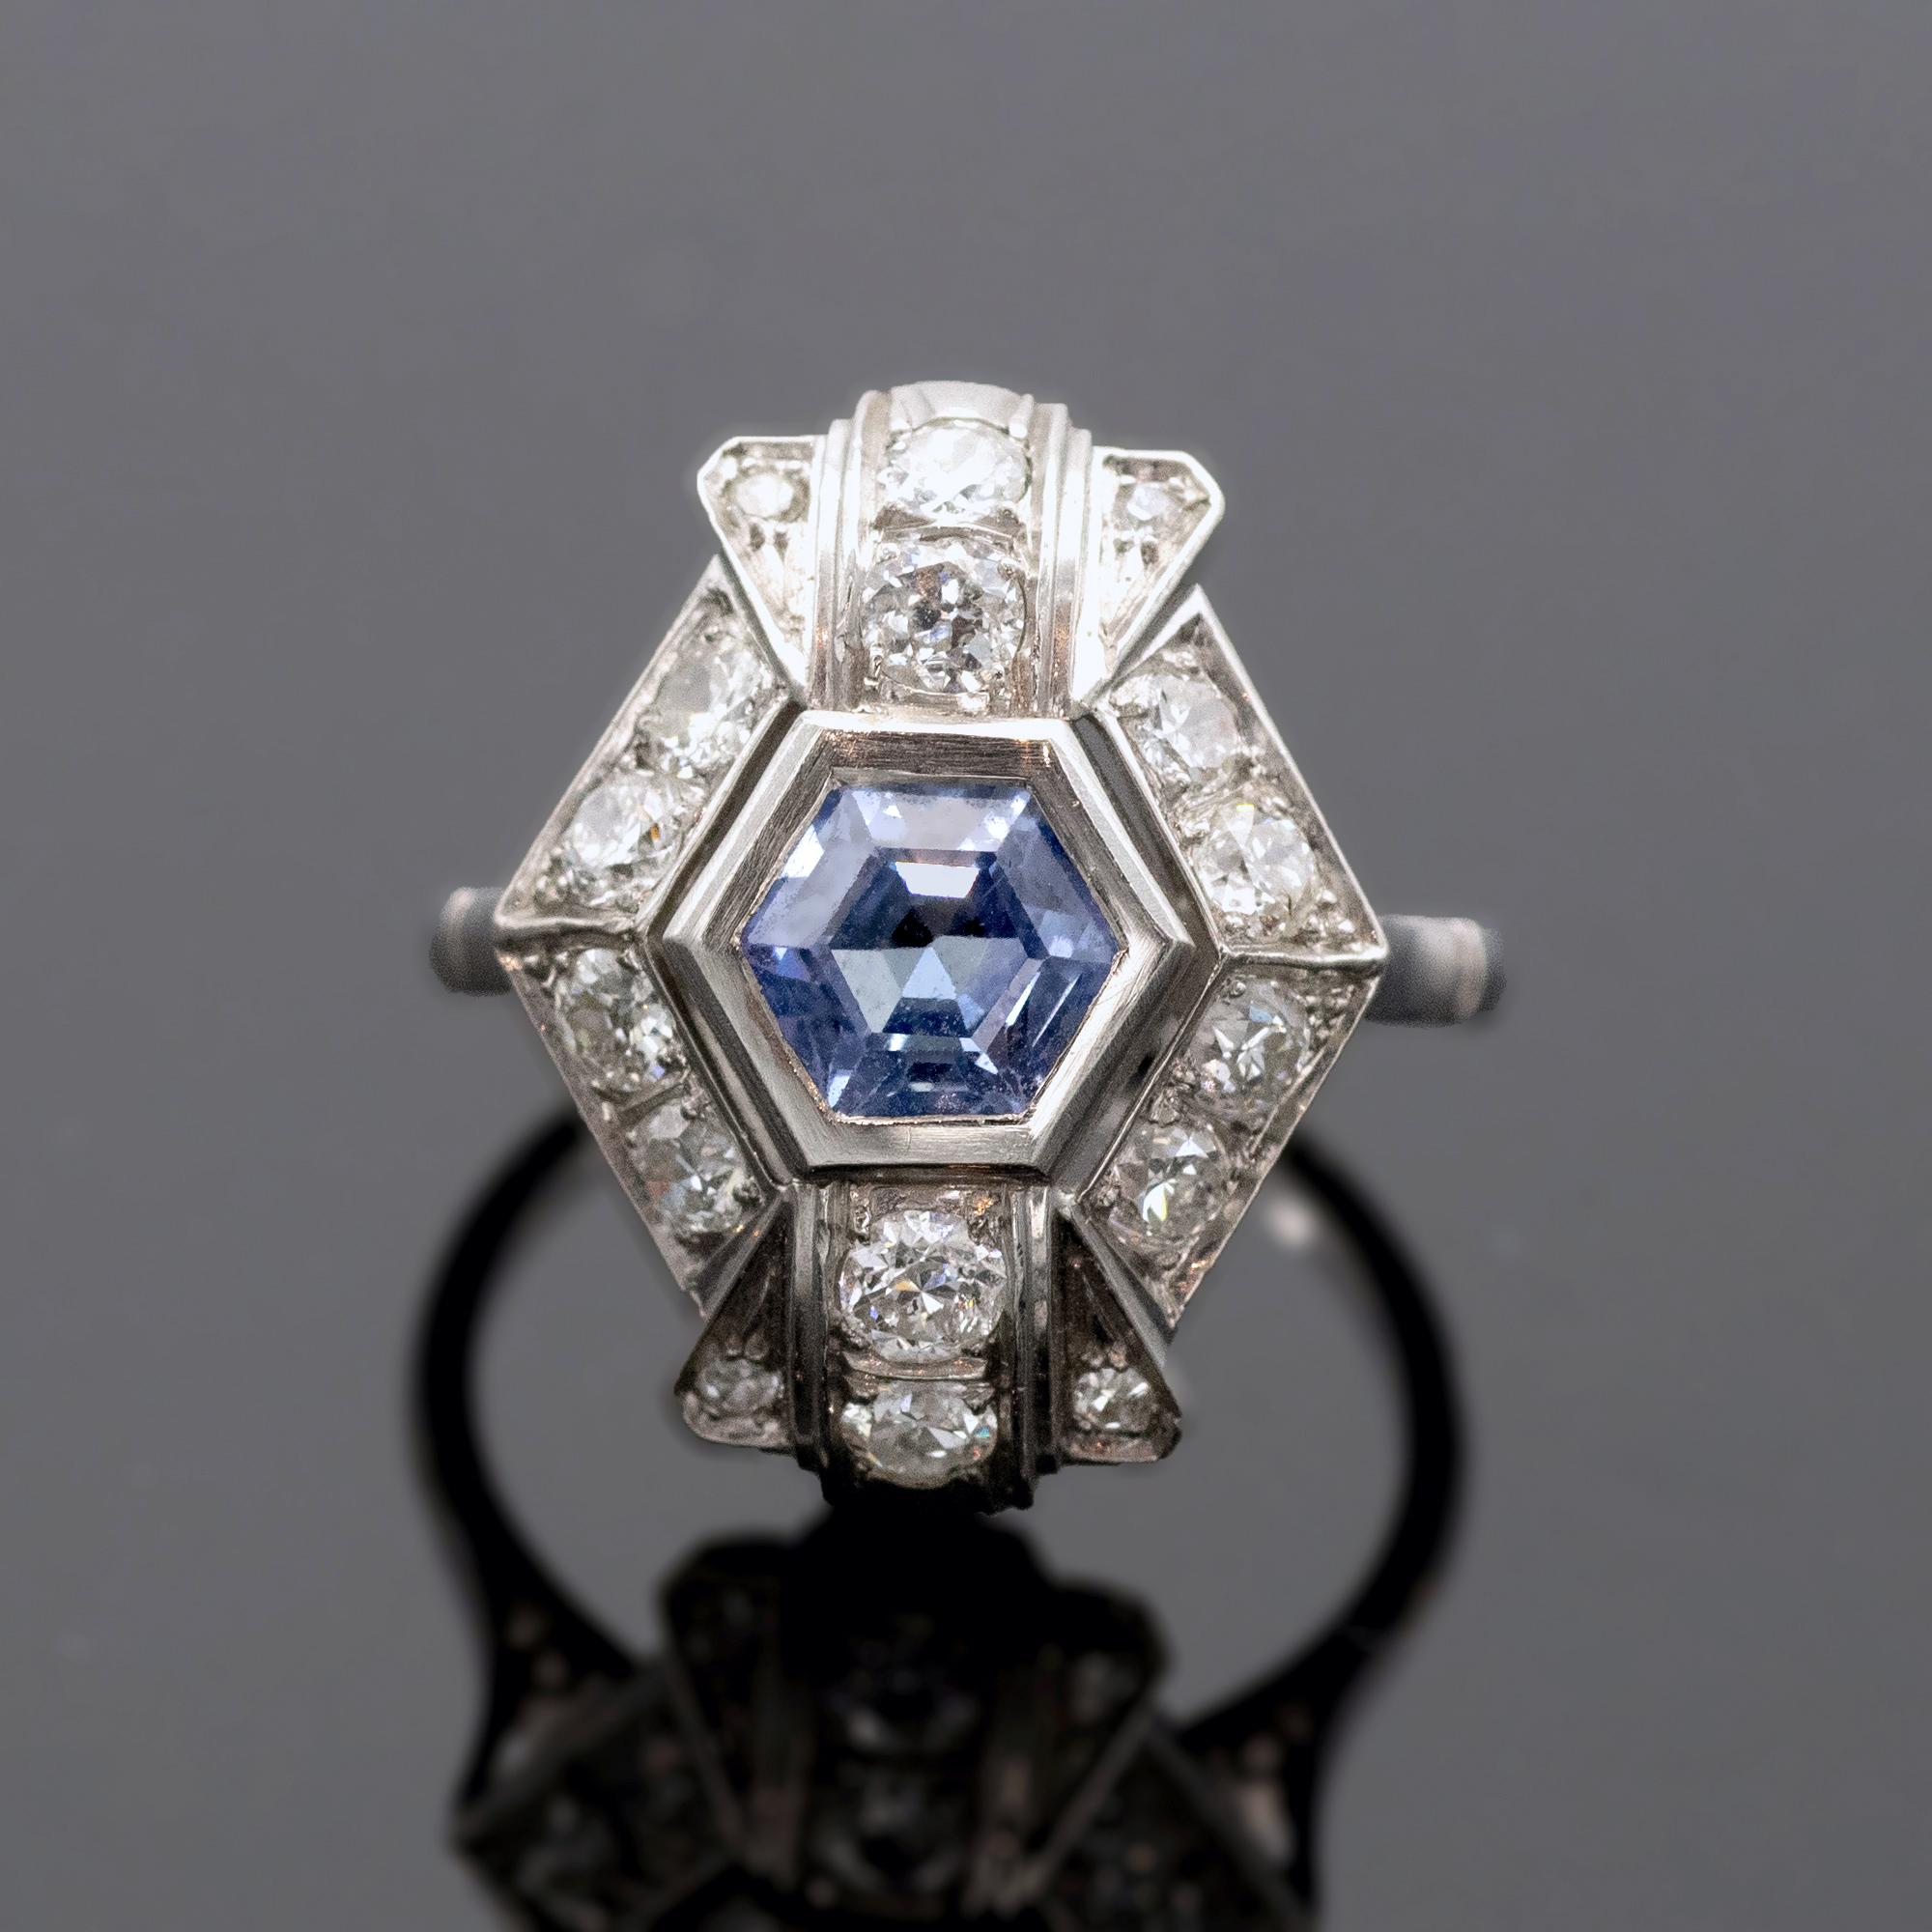 Art Deco platinum ring set in its center with a lively hexagonal sapphire and round diamonds.
The sapphire is ±1.25 carat, and there is approximatively 0.84 carat of diamonds.
weight 12.8 grams - French state hallmark stamp